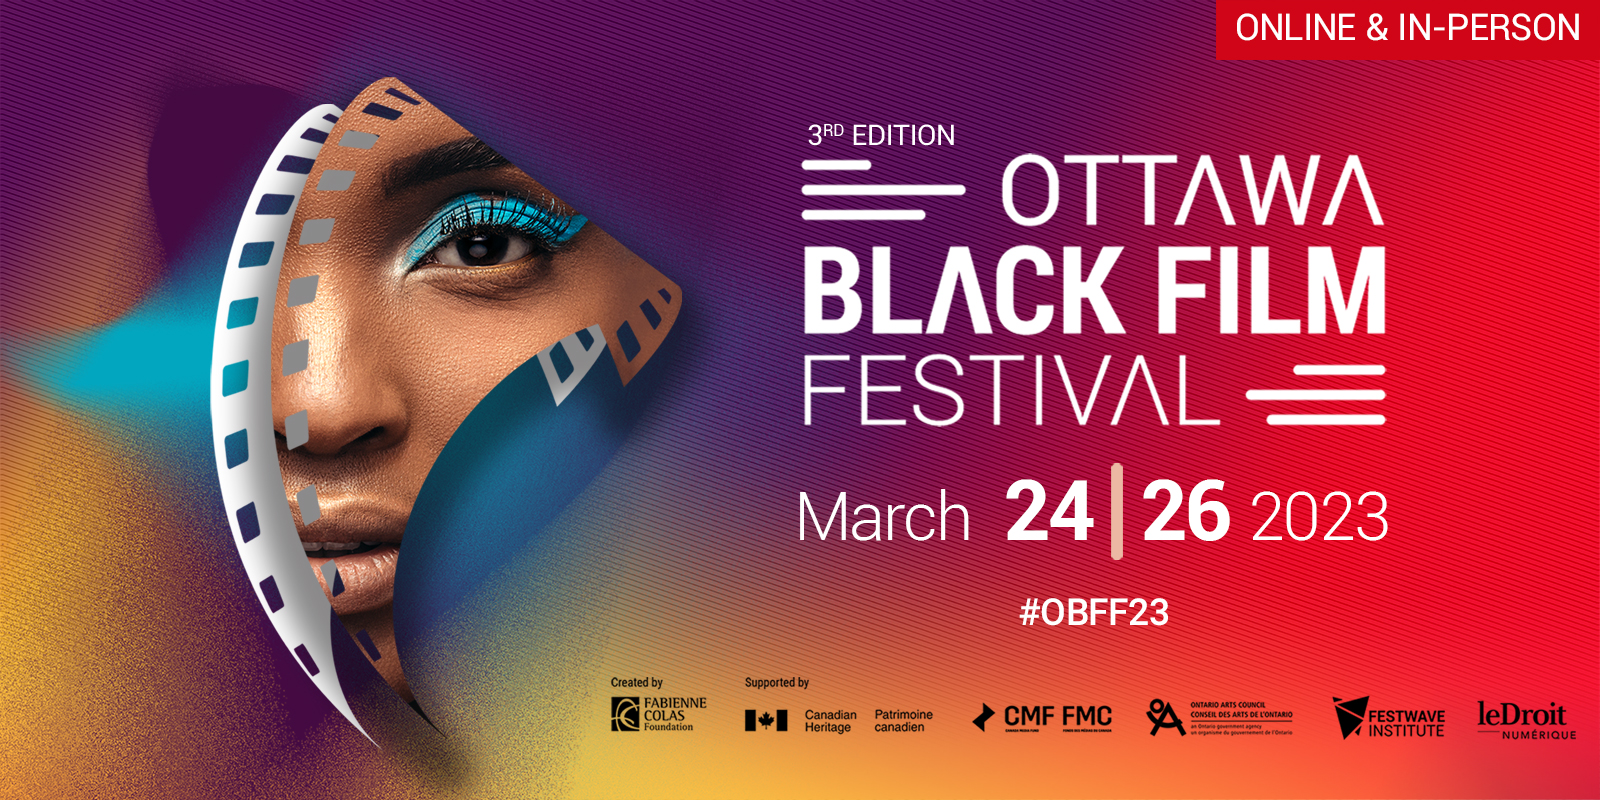 The 3rd OTTAWA BLACK FILM FESTIVAL opens with 1960 by King Shaft and Michael Mutombo + 40 Films from around the globe